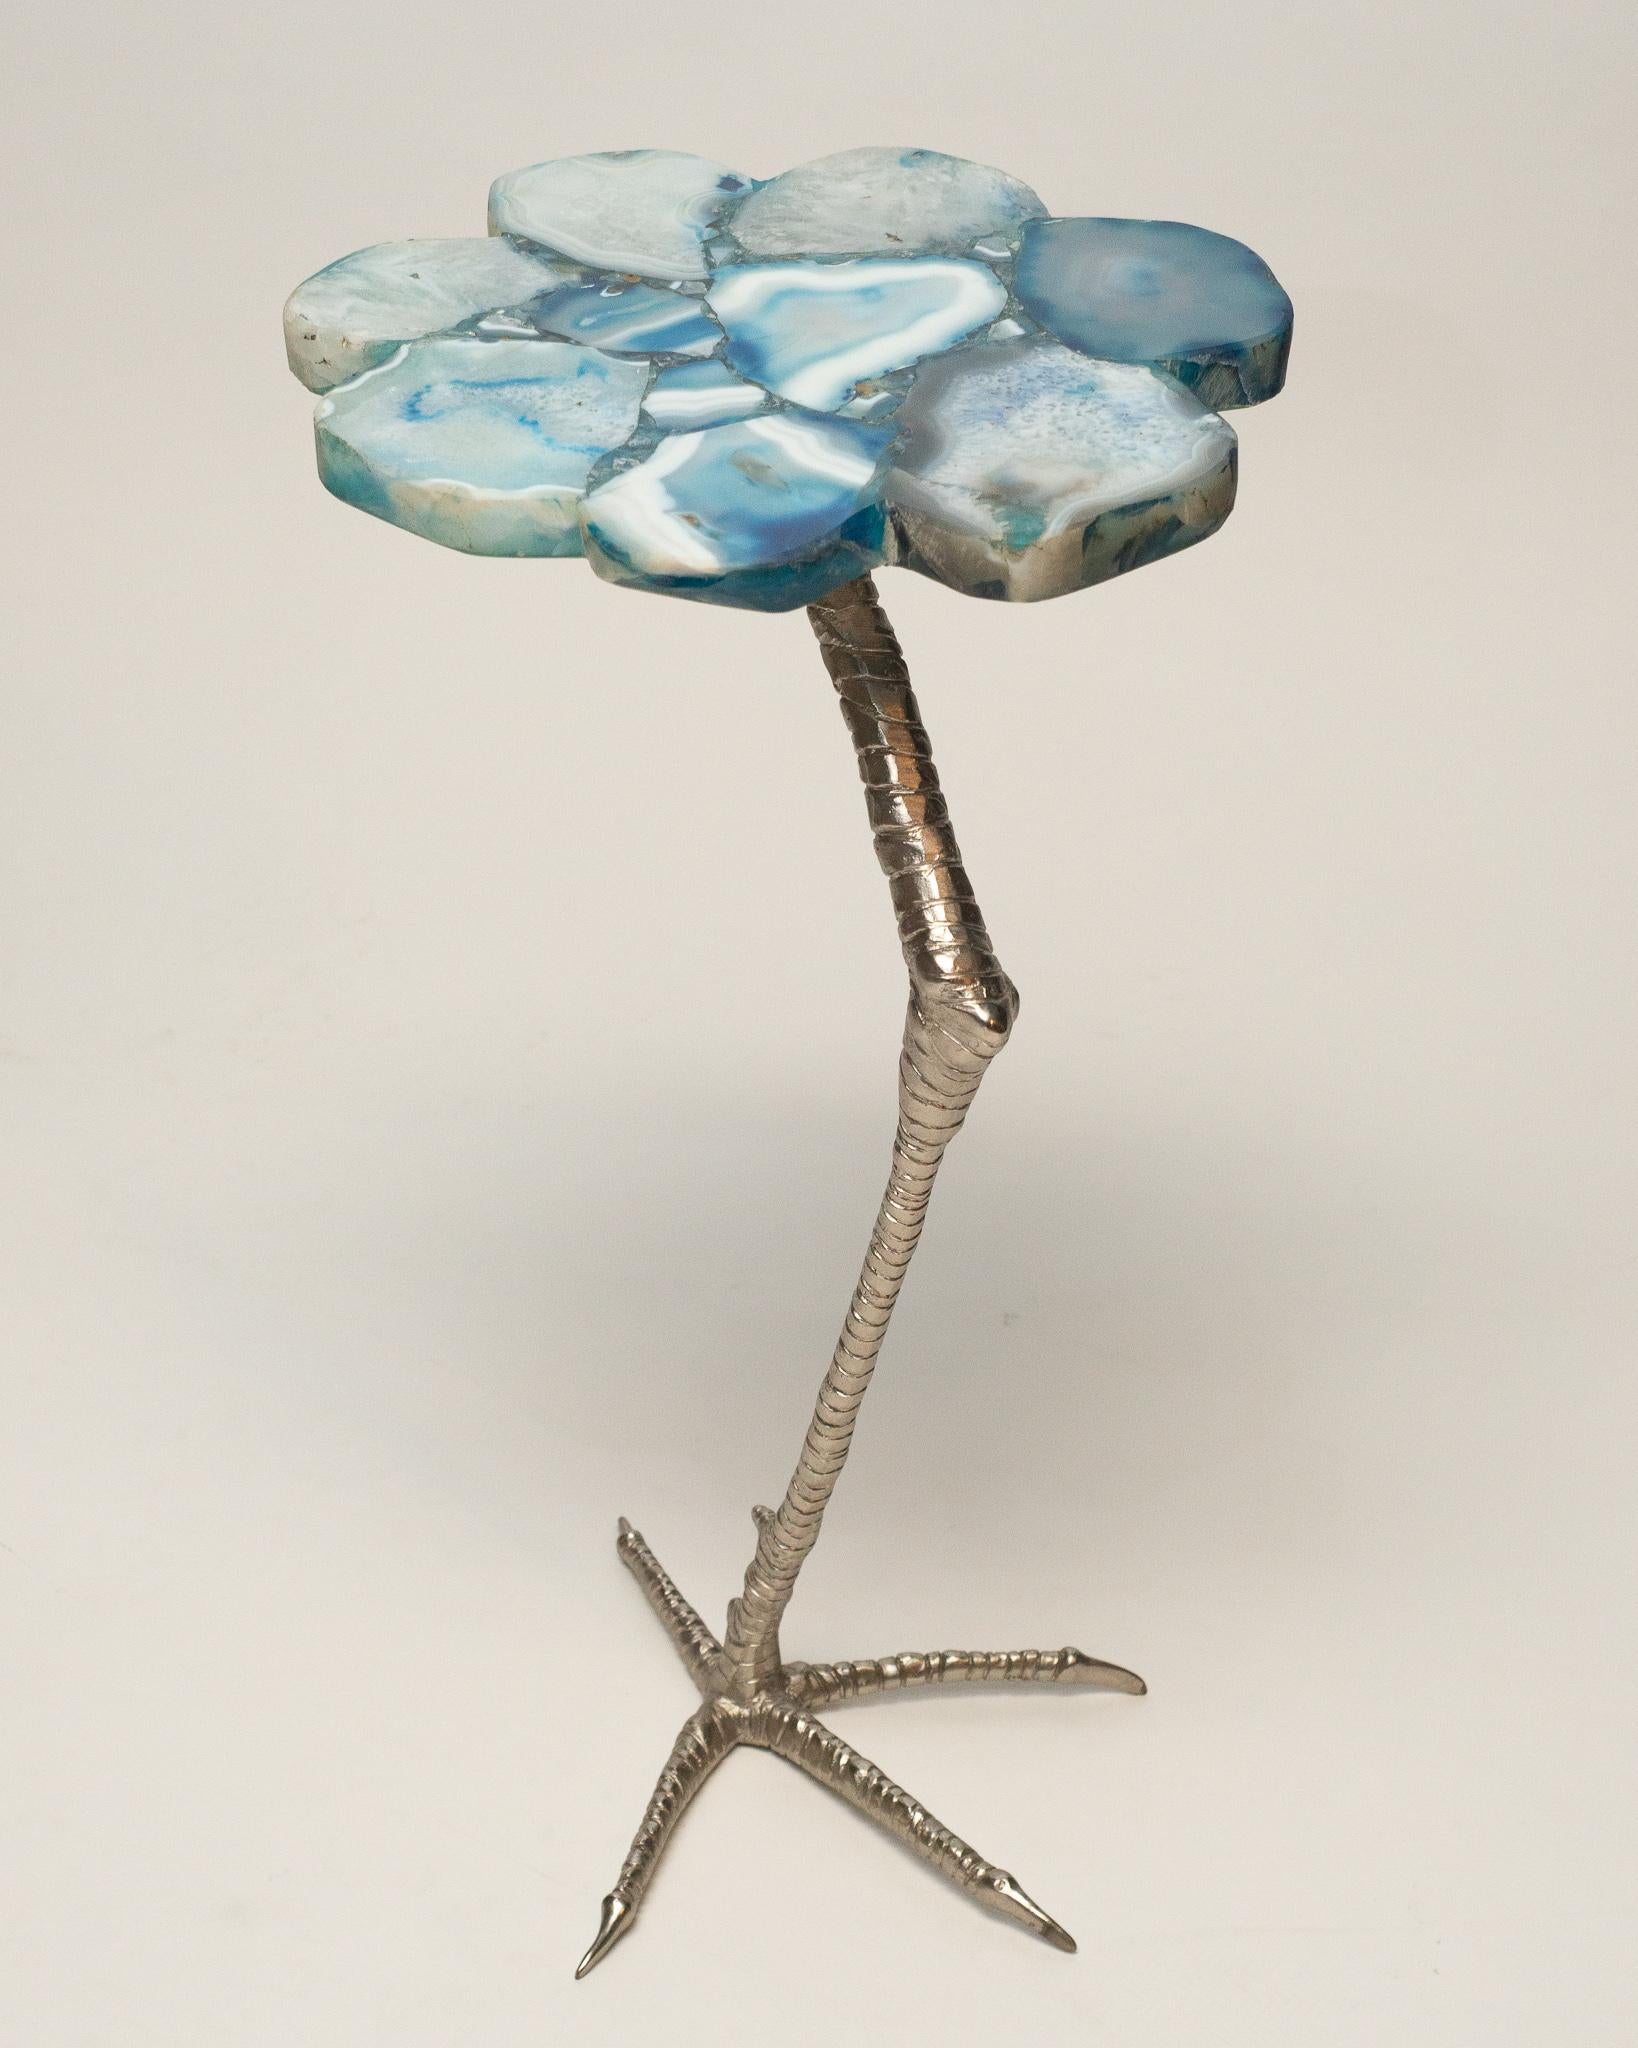 A stunning blue agate drink table with a chrome ostrich leg. The vibrant stones add an element of bright, bold colour to any room. Agates, named for the Achates river in Sicily, are known for being some of the most colorful semi-precious stones